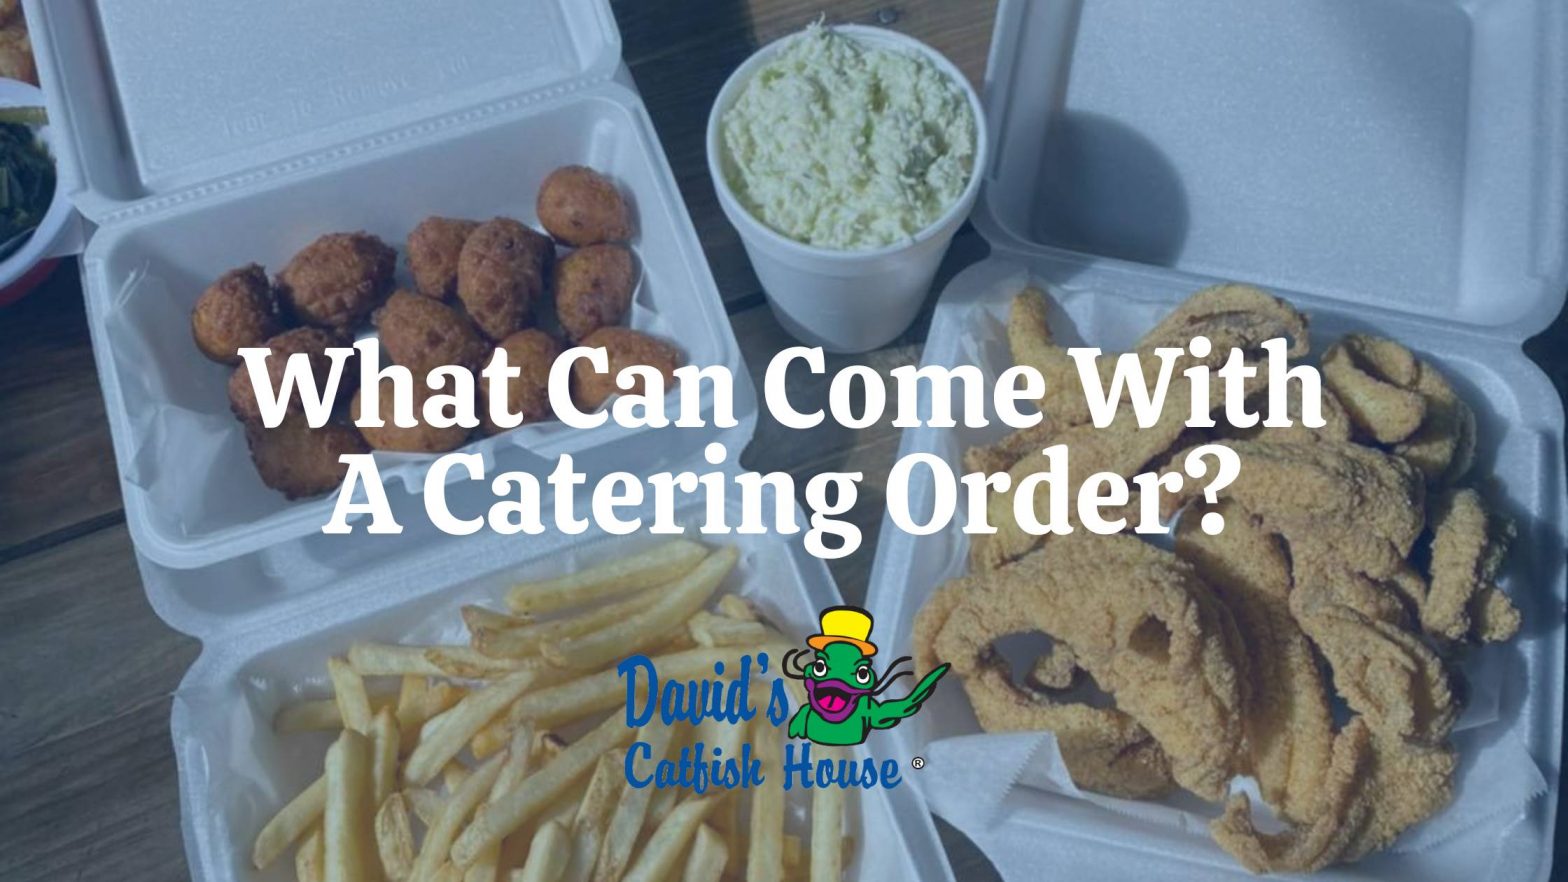 What Can Come With a Catering Order?